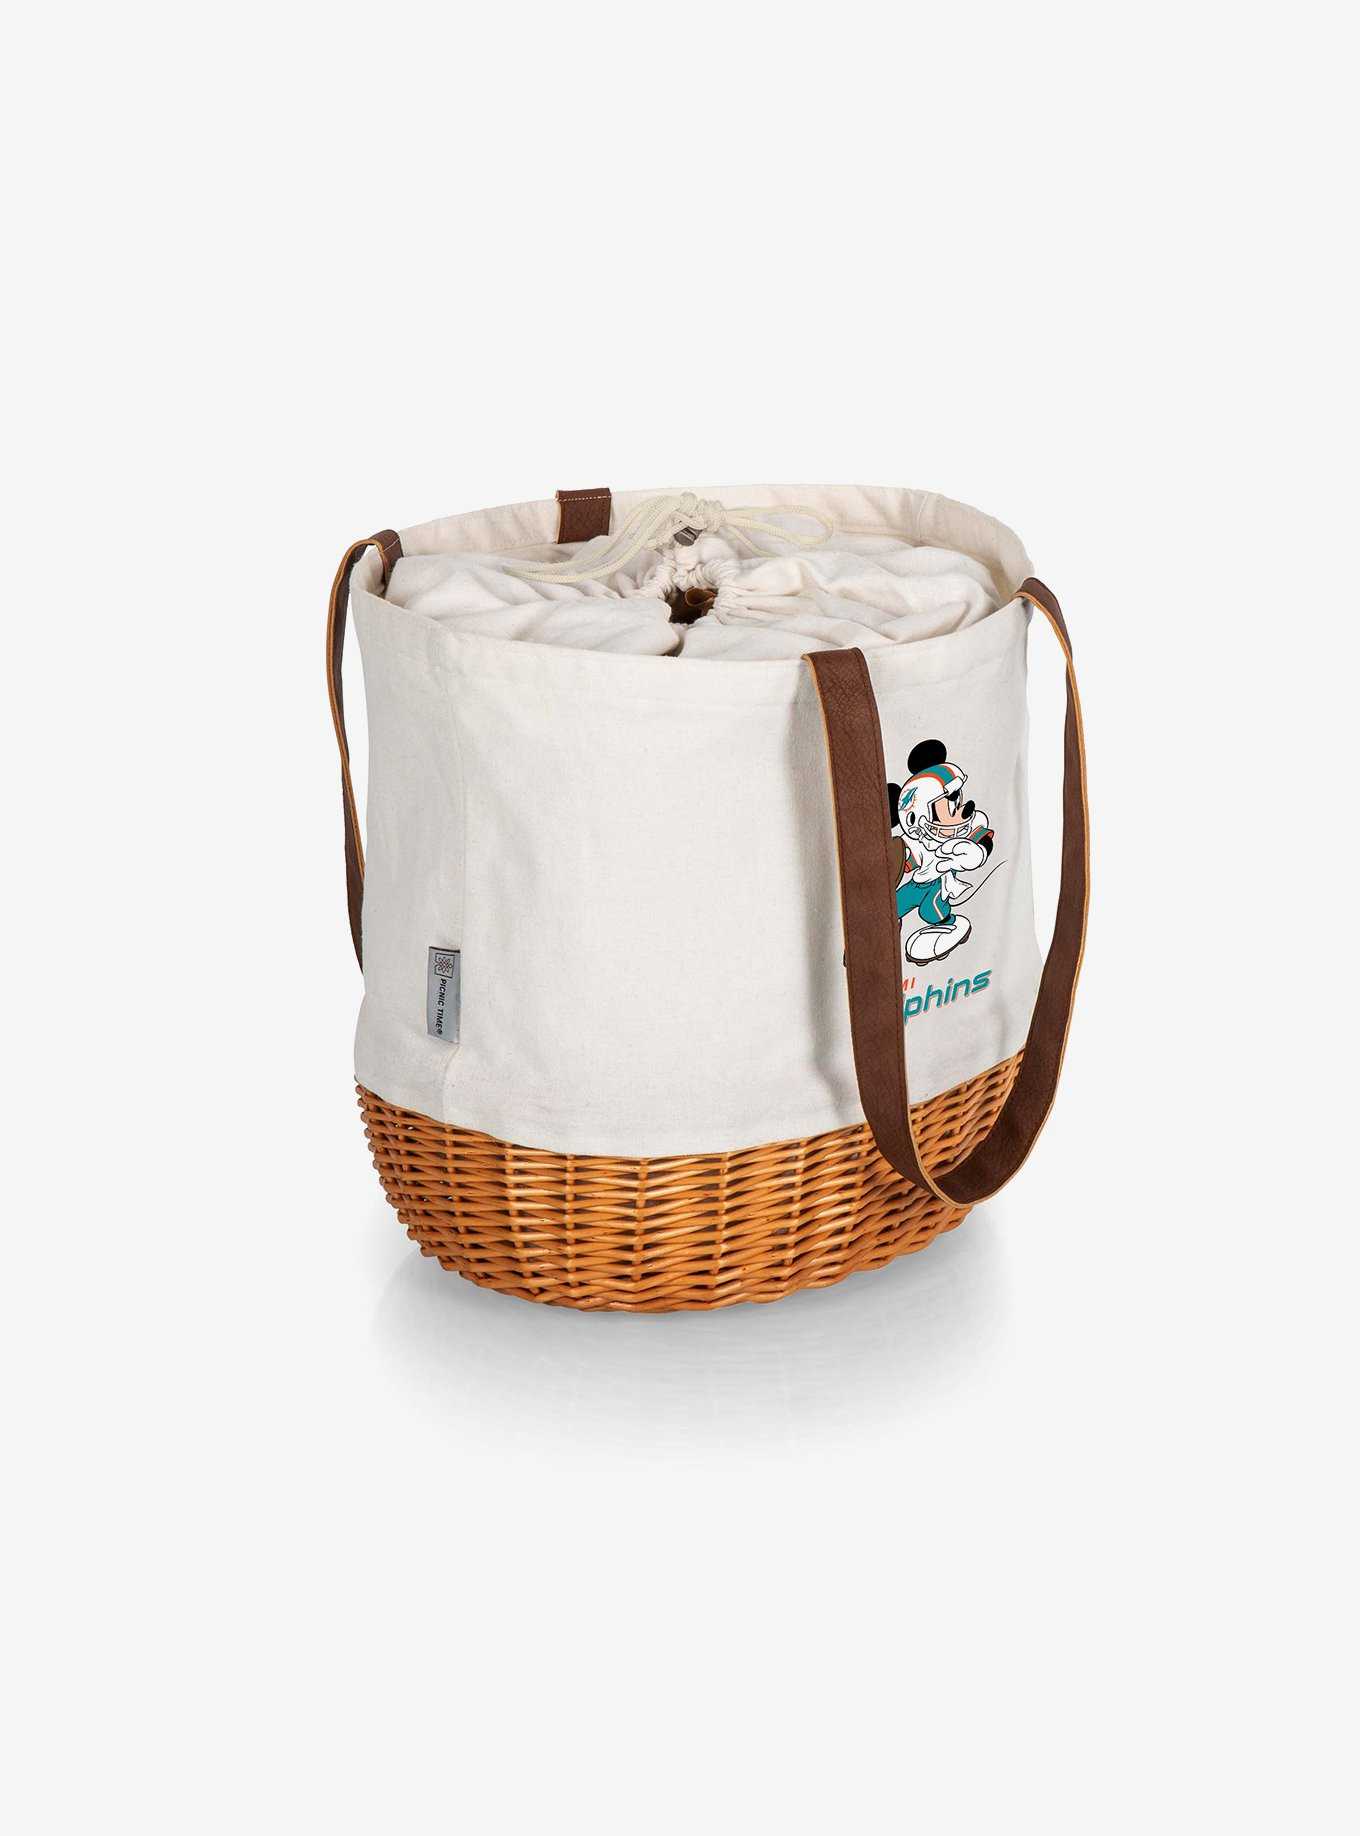 Disney Mickey Mouse NFL Miami Dolphins Canvas Willow Basket Tote, , hi-res